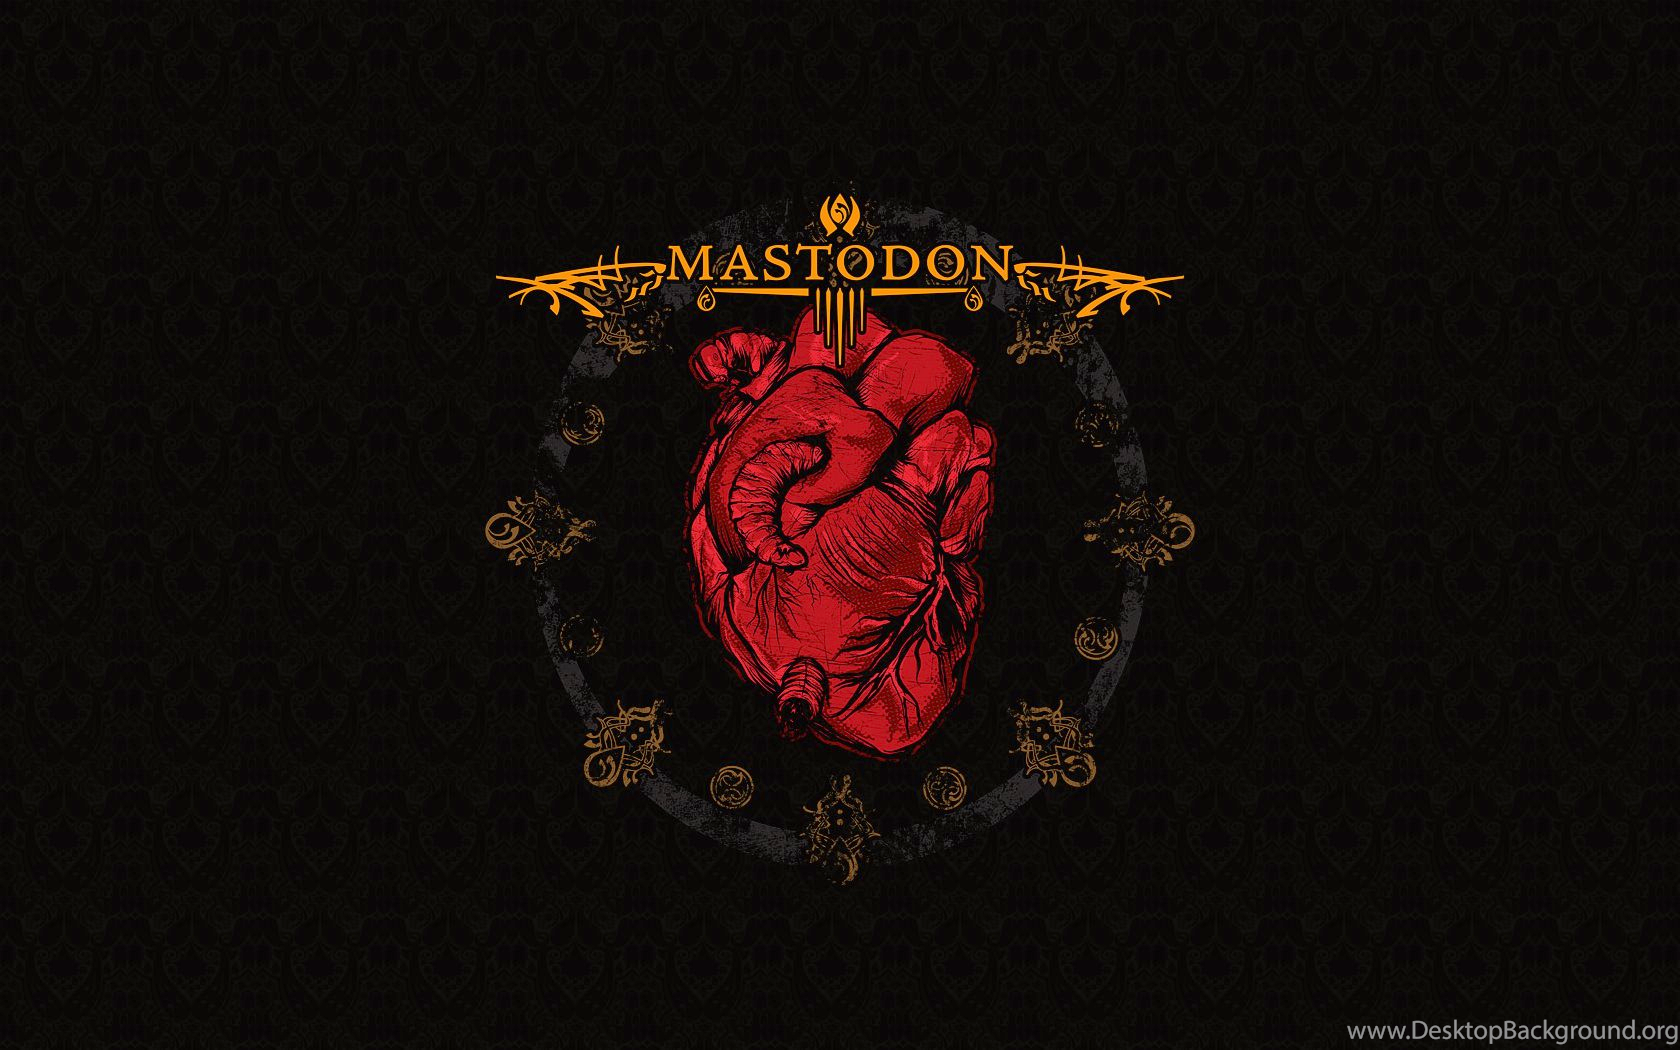 Crest Album Covers 2006 Mastodon 1600x1591 Wallpapers High Quality Images, Photos, Reviews